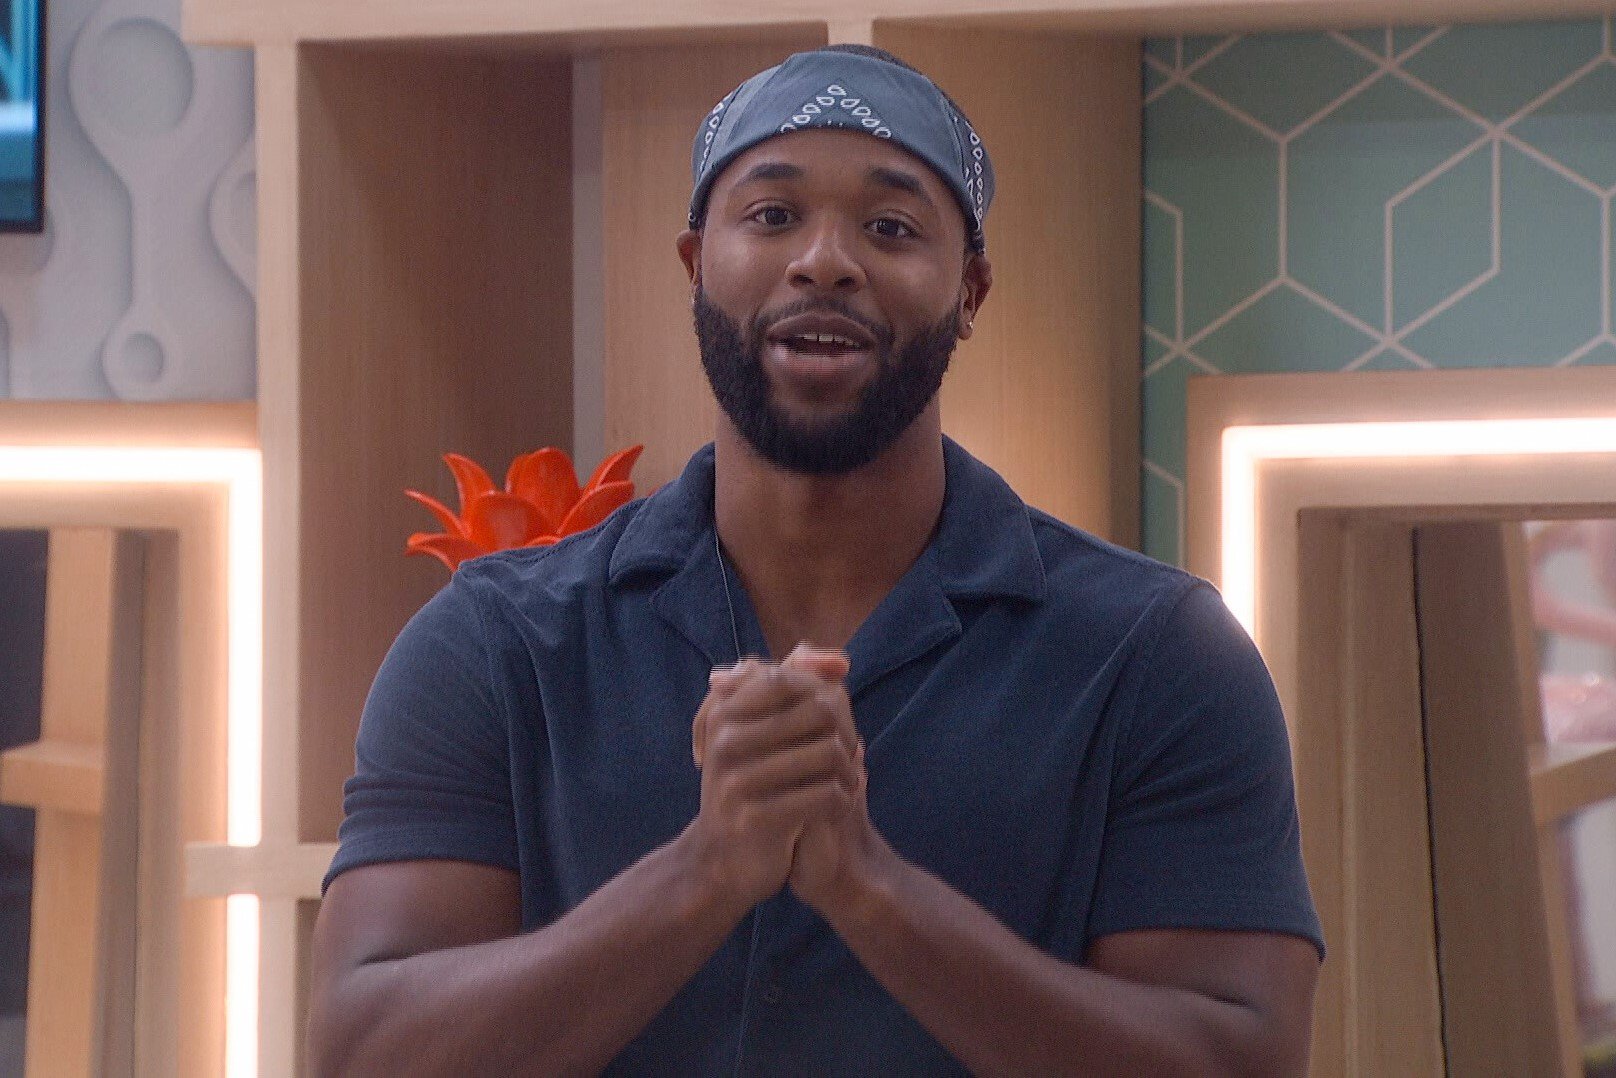 Monte Taylor, who, according to 'Big Brother 24' spoilers secured his spot in the final three, wears a dark blue polo shirt and blue bandana as a headband.